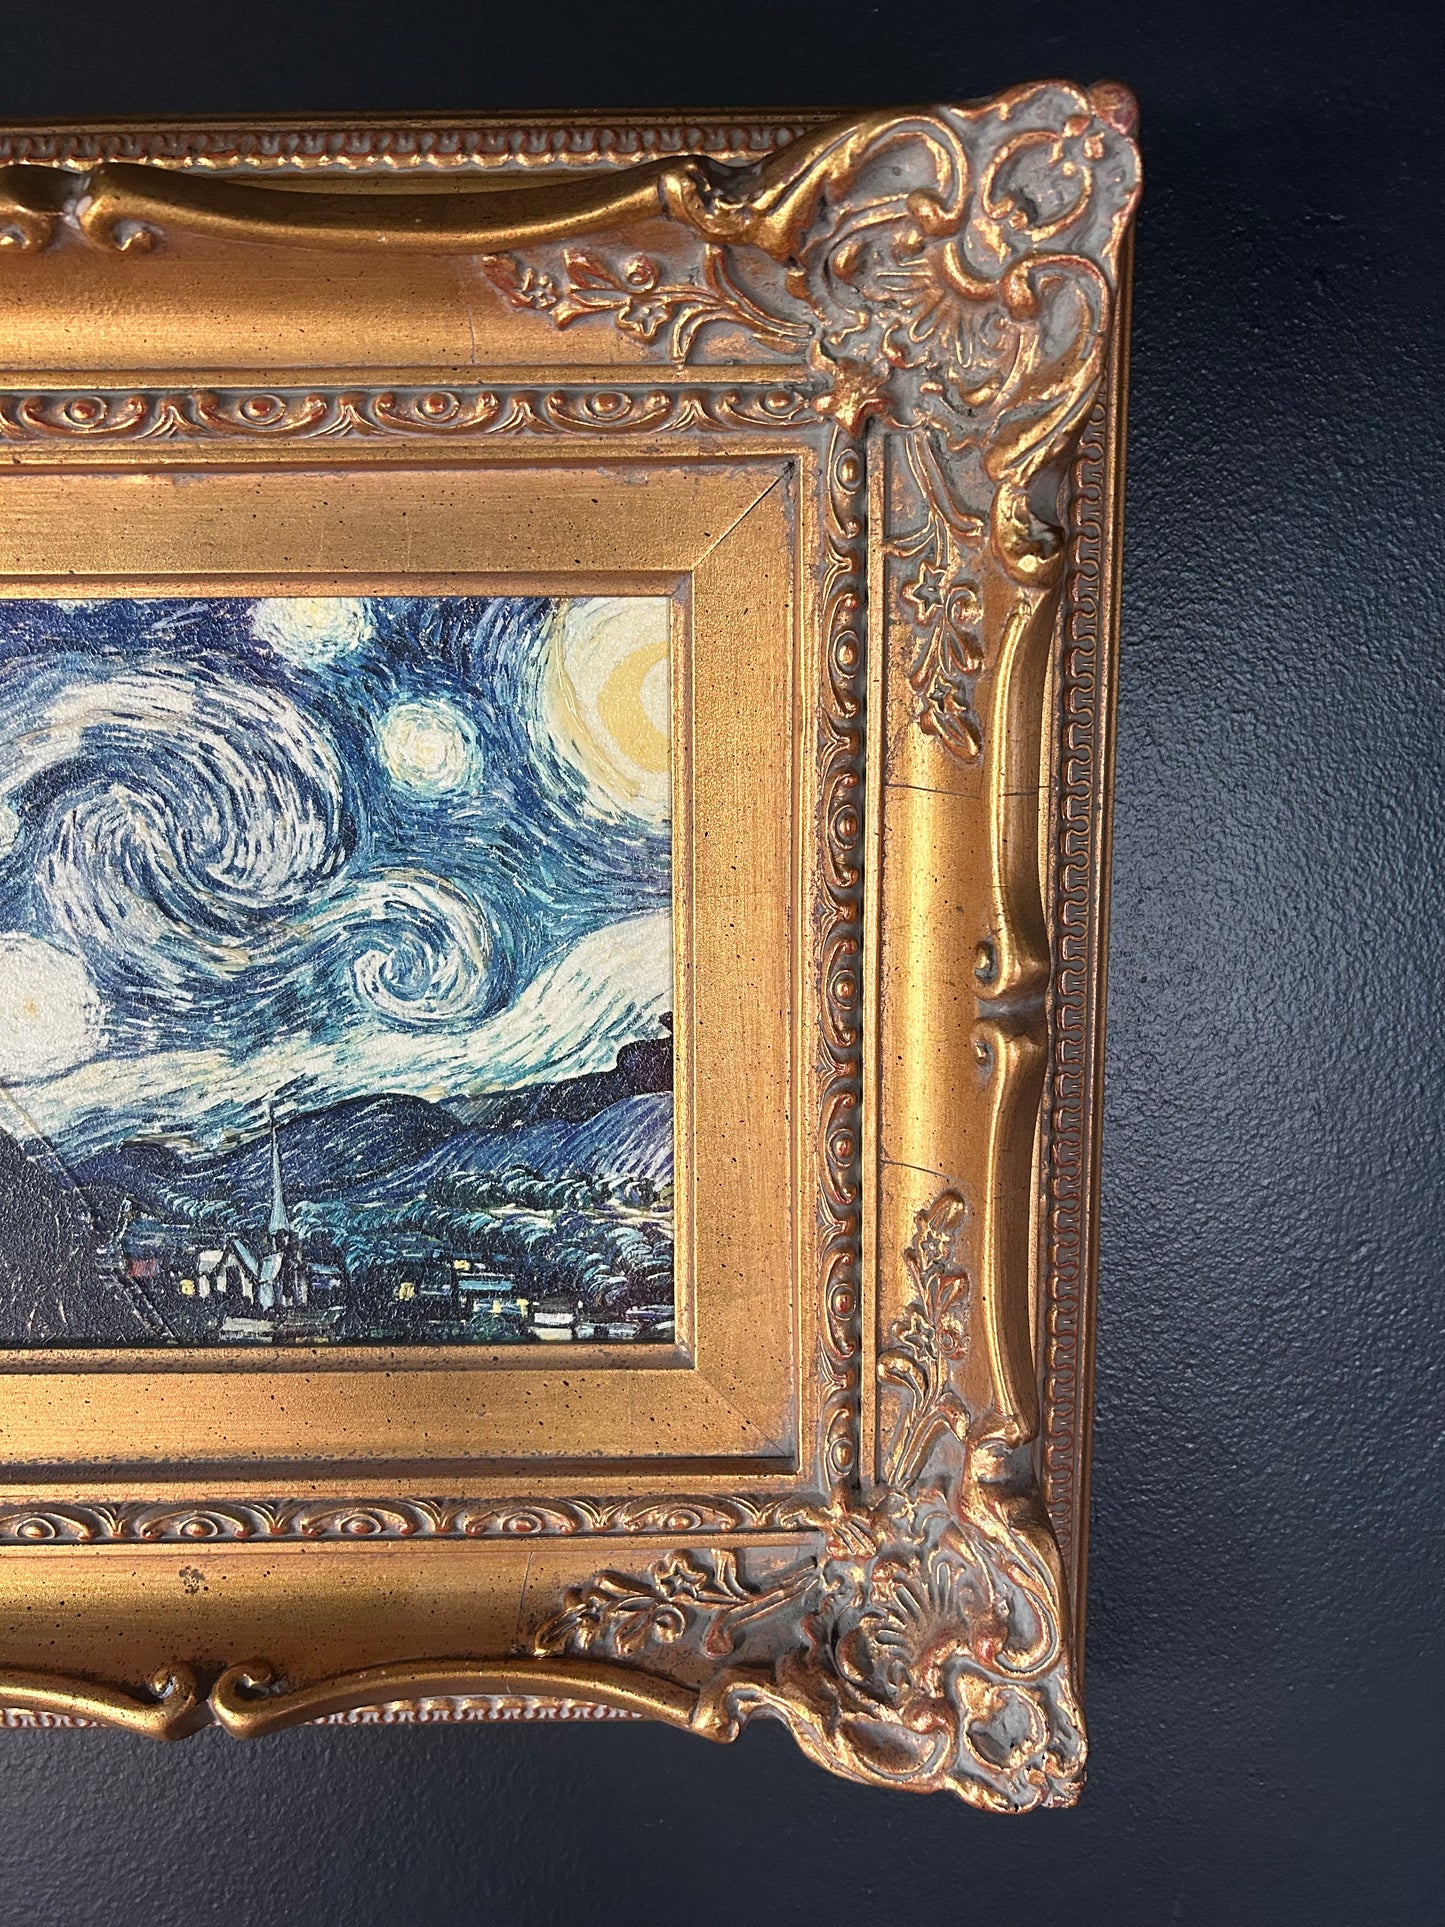 Van Gogh 'Starry Night' reproduction with gilded frame